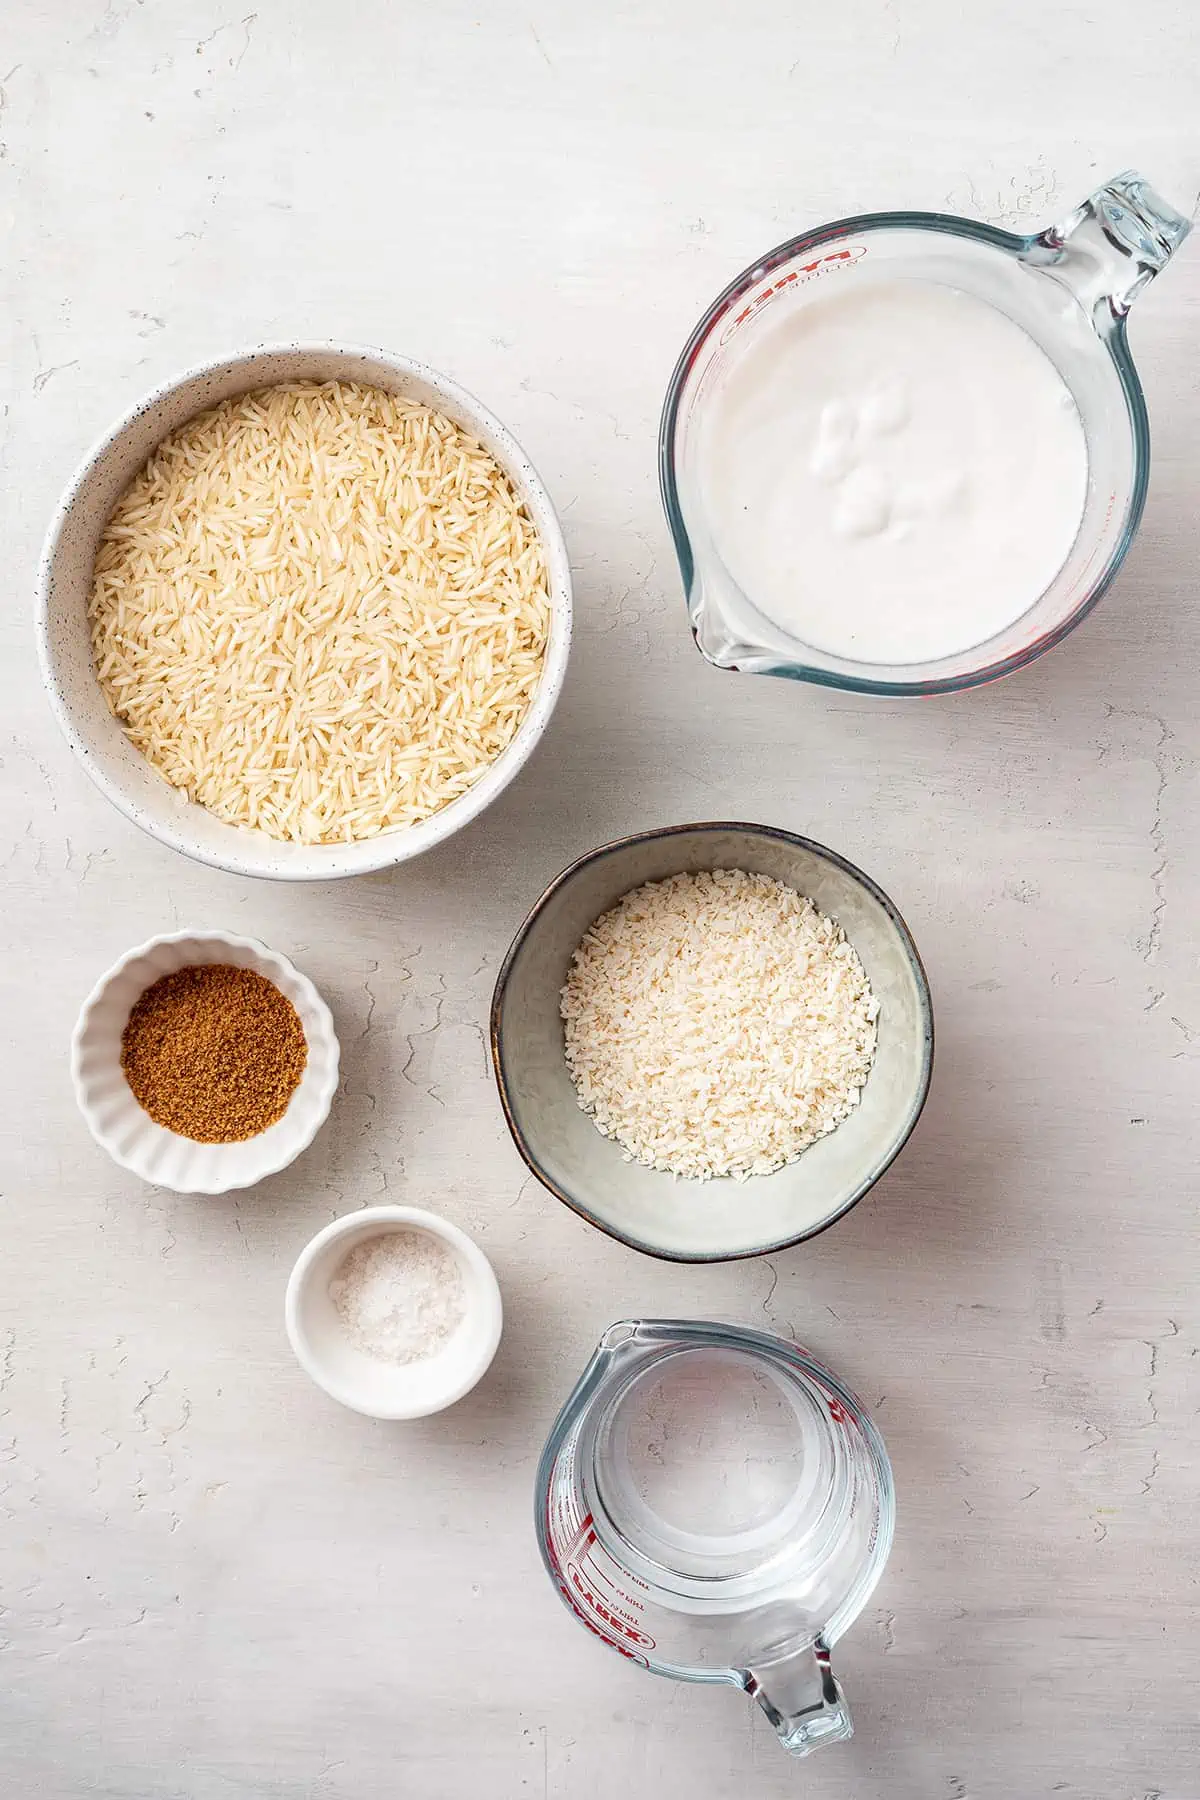 Overhead view of the ingredients needed for coconut rice: bowls of rice, shredded coconut, salt, and coconut sugar, and pyrex containers of water and coconut milk.